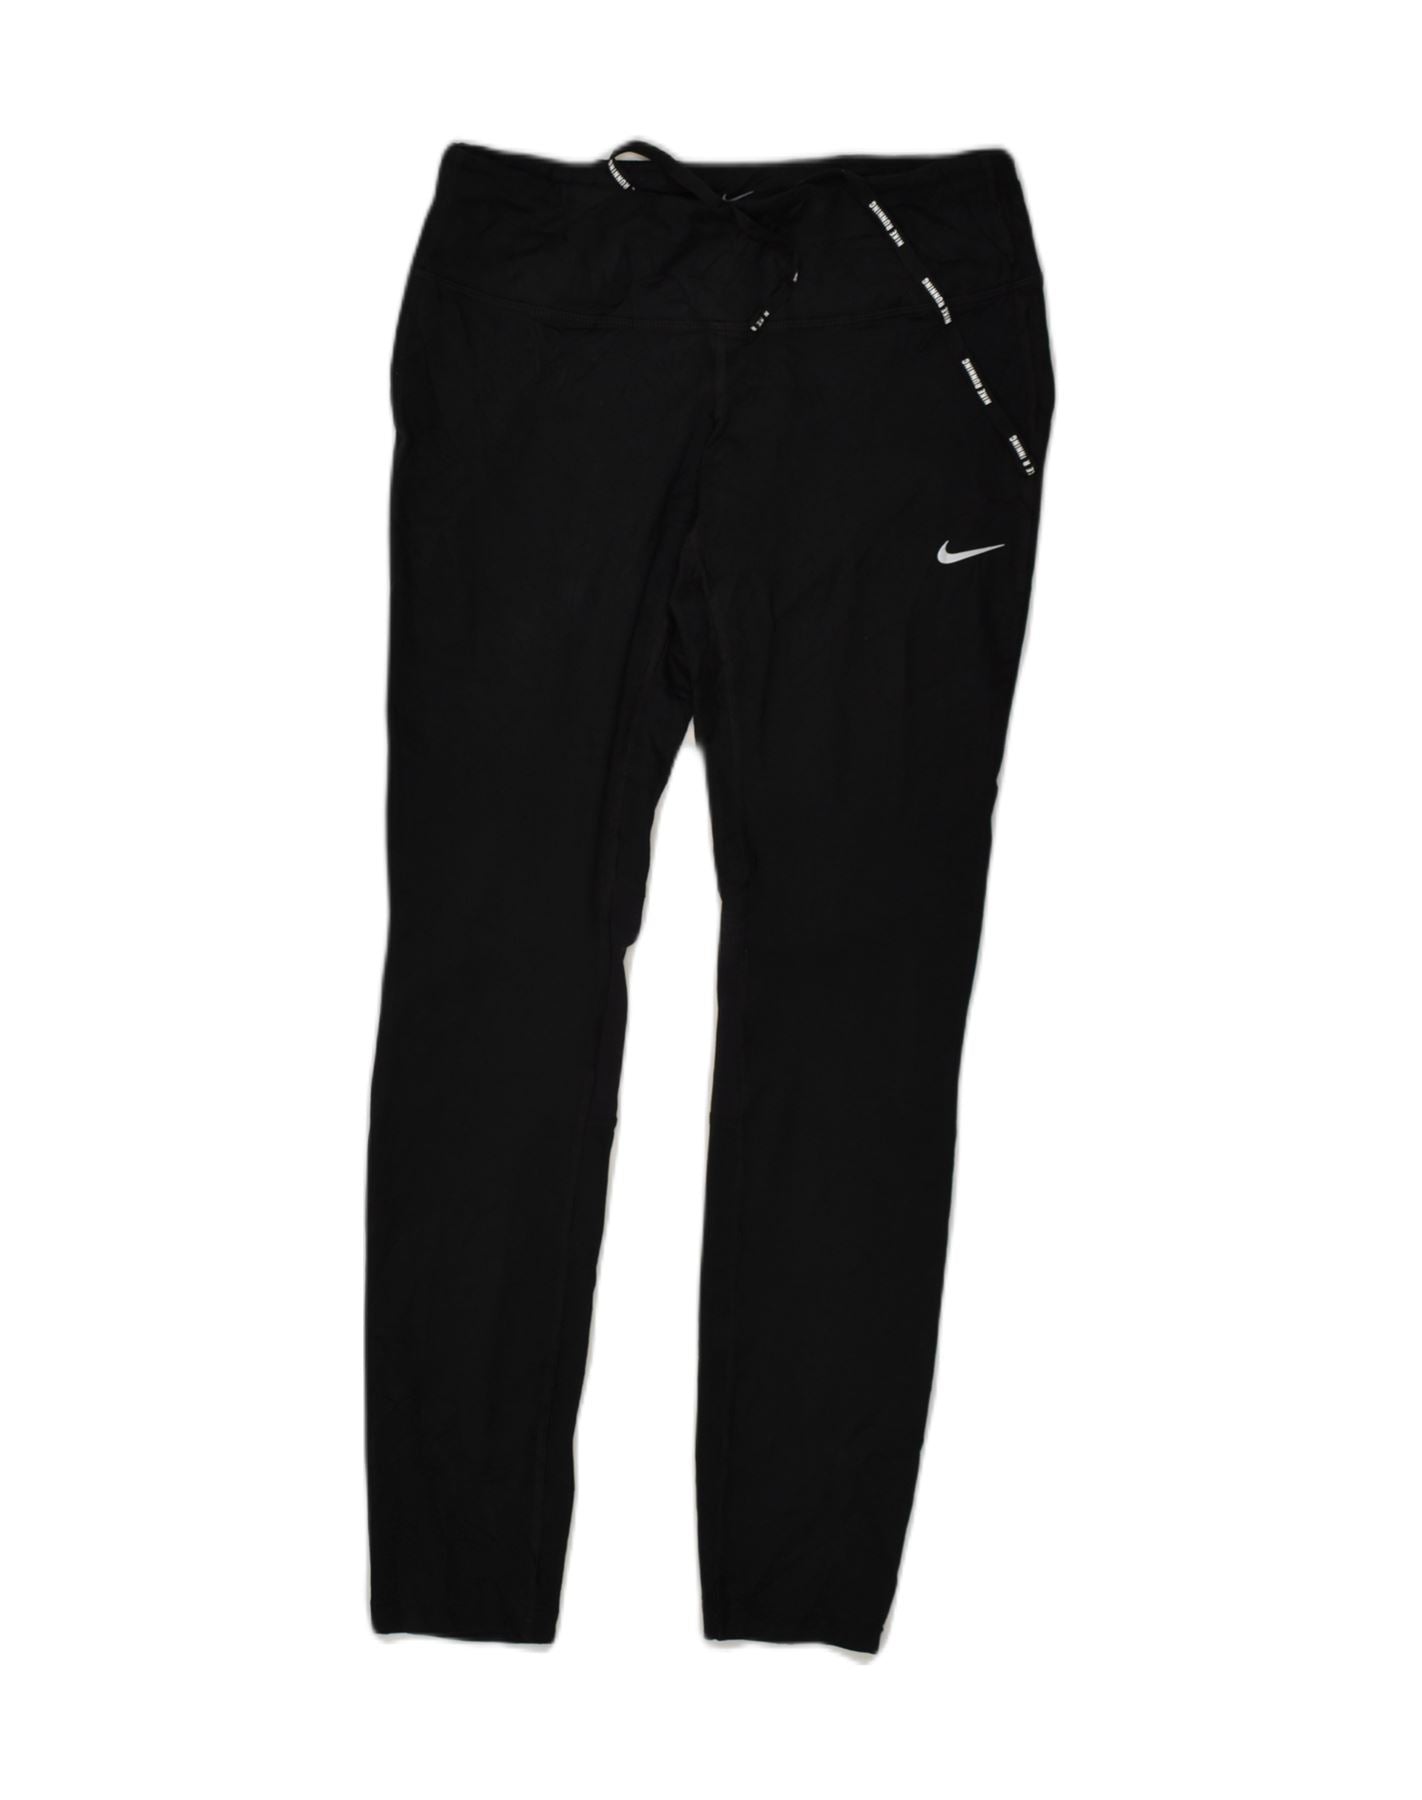 NIKE Womens Leggings UK 10 Small Black Polyester, Vintage & Second-Hand  Clothing Online